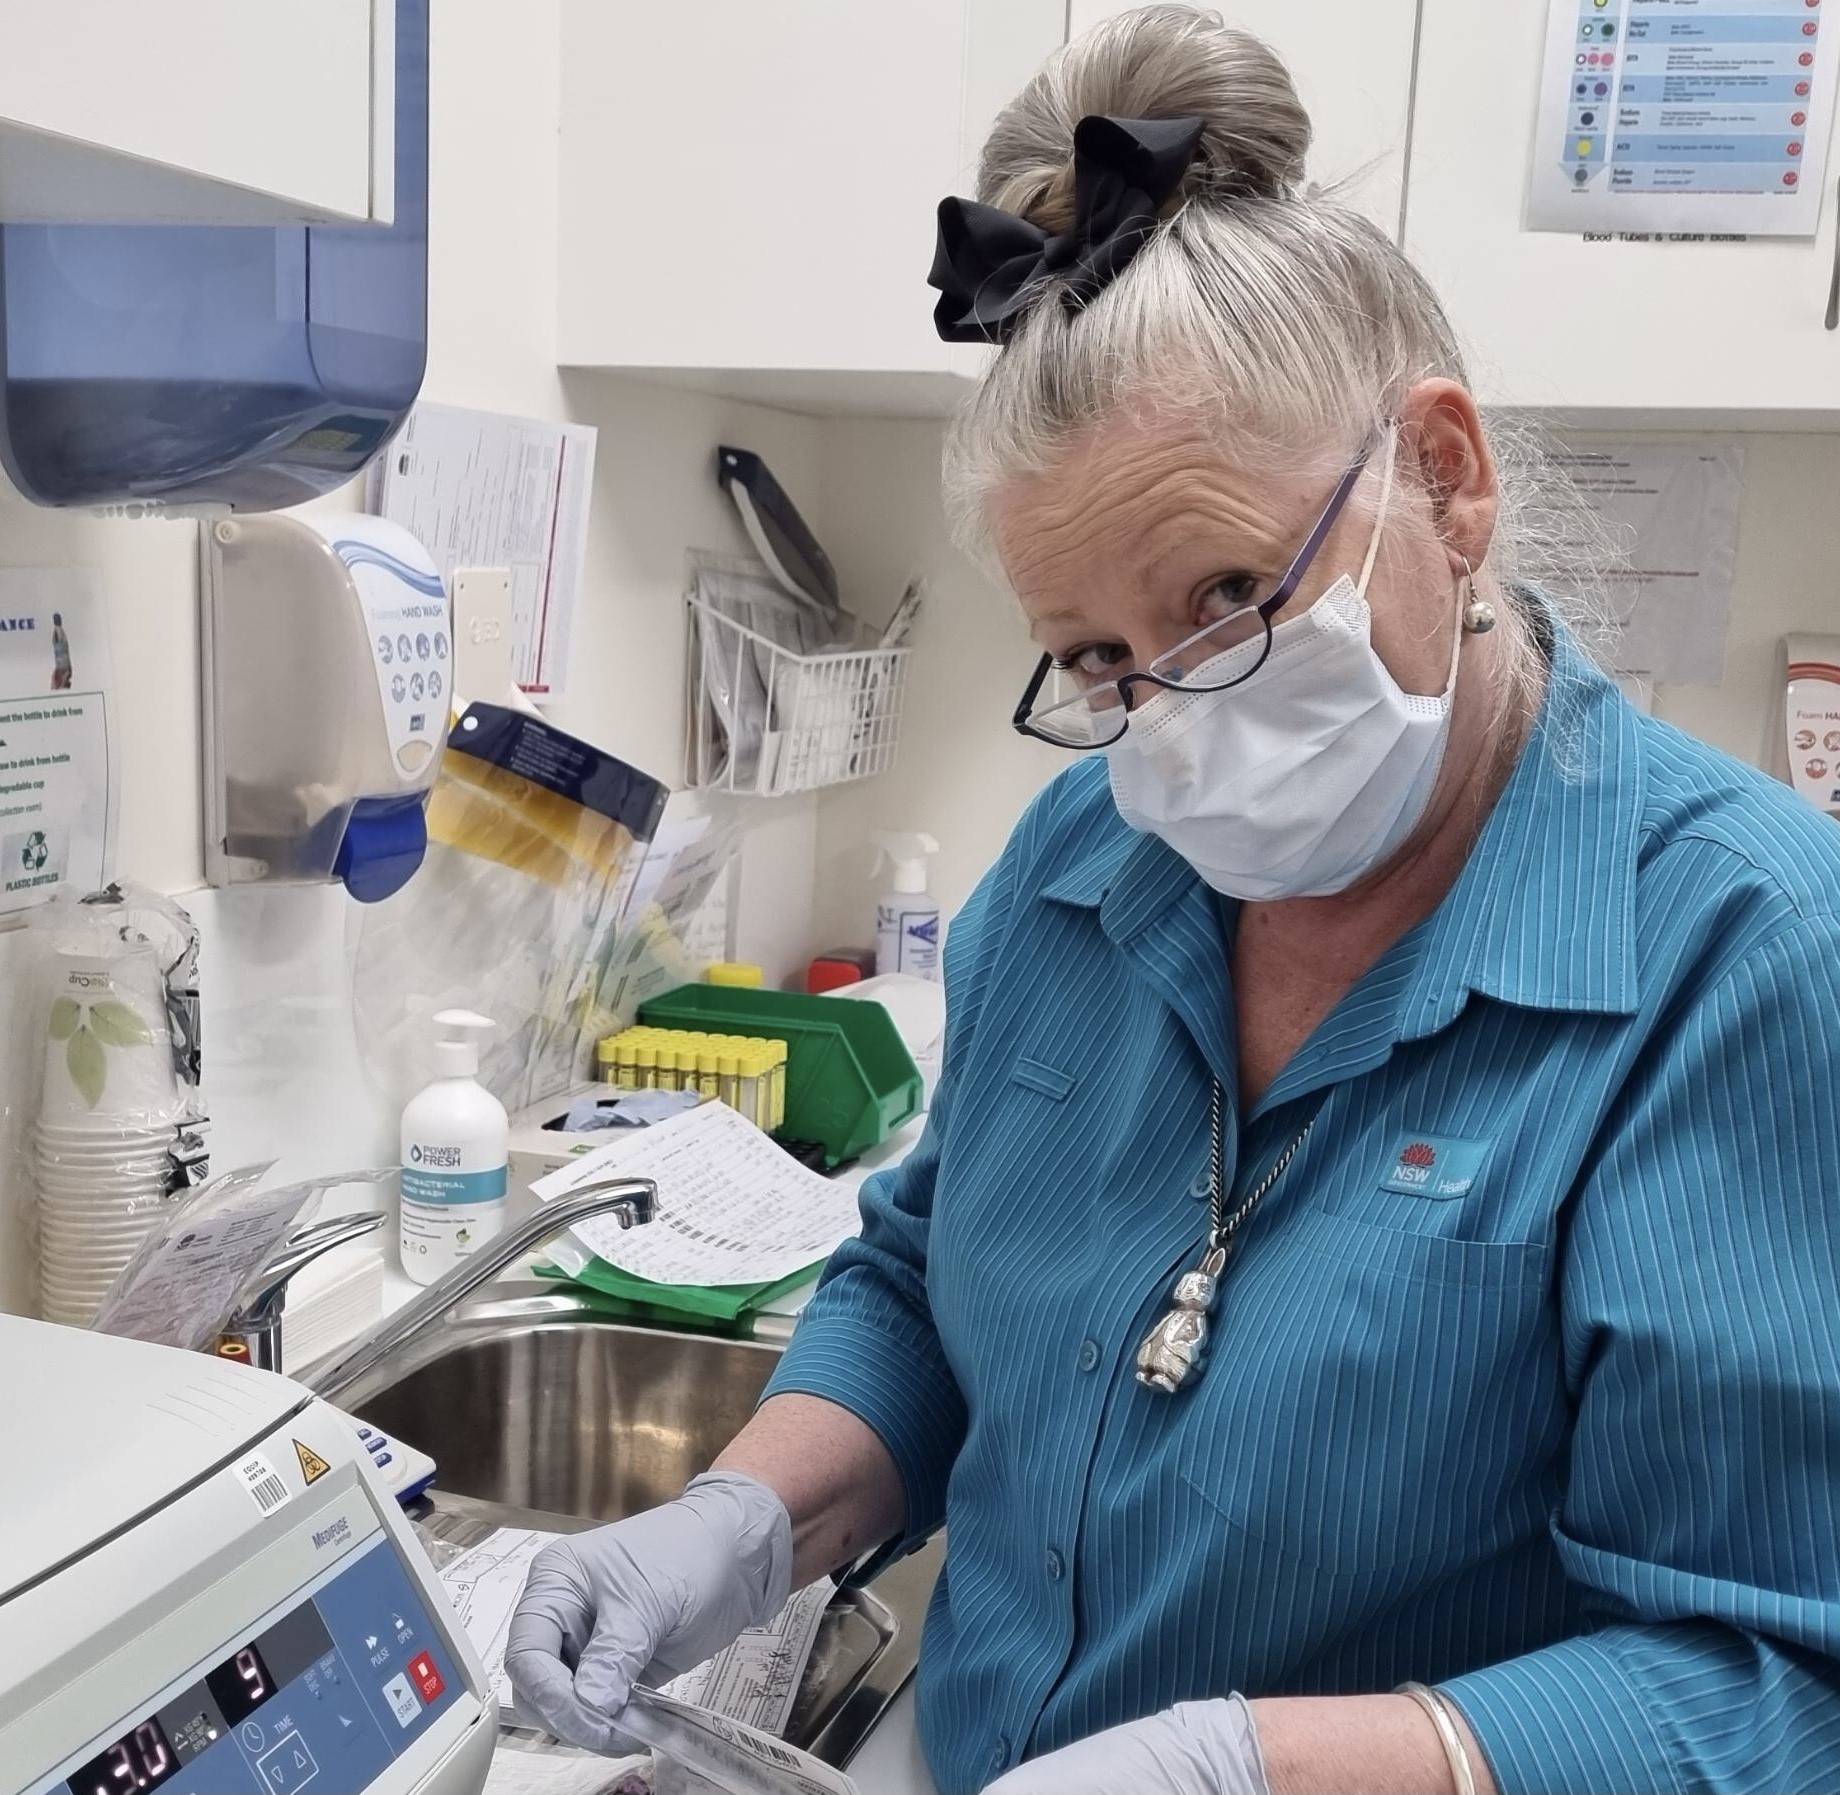 Meet Hayley – experienced pathology collector